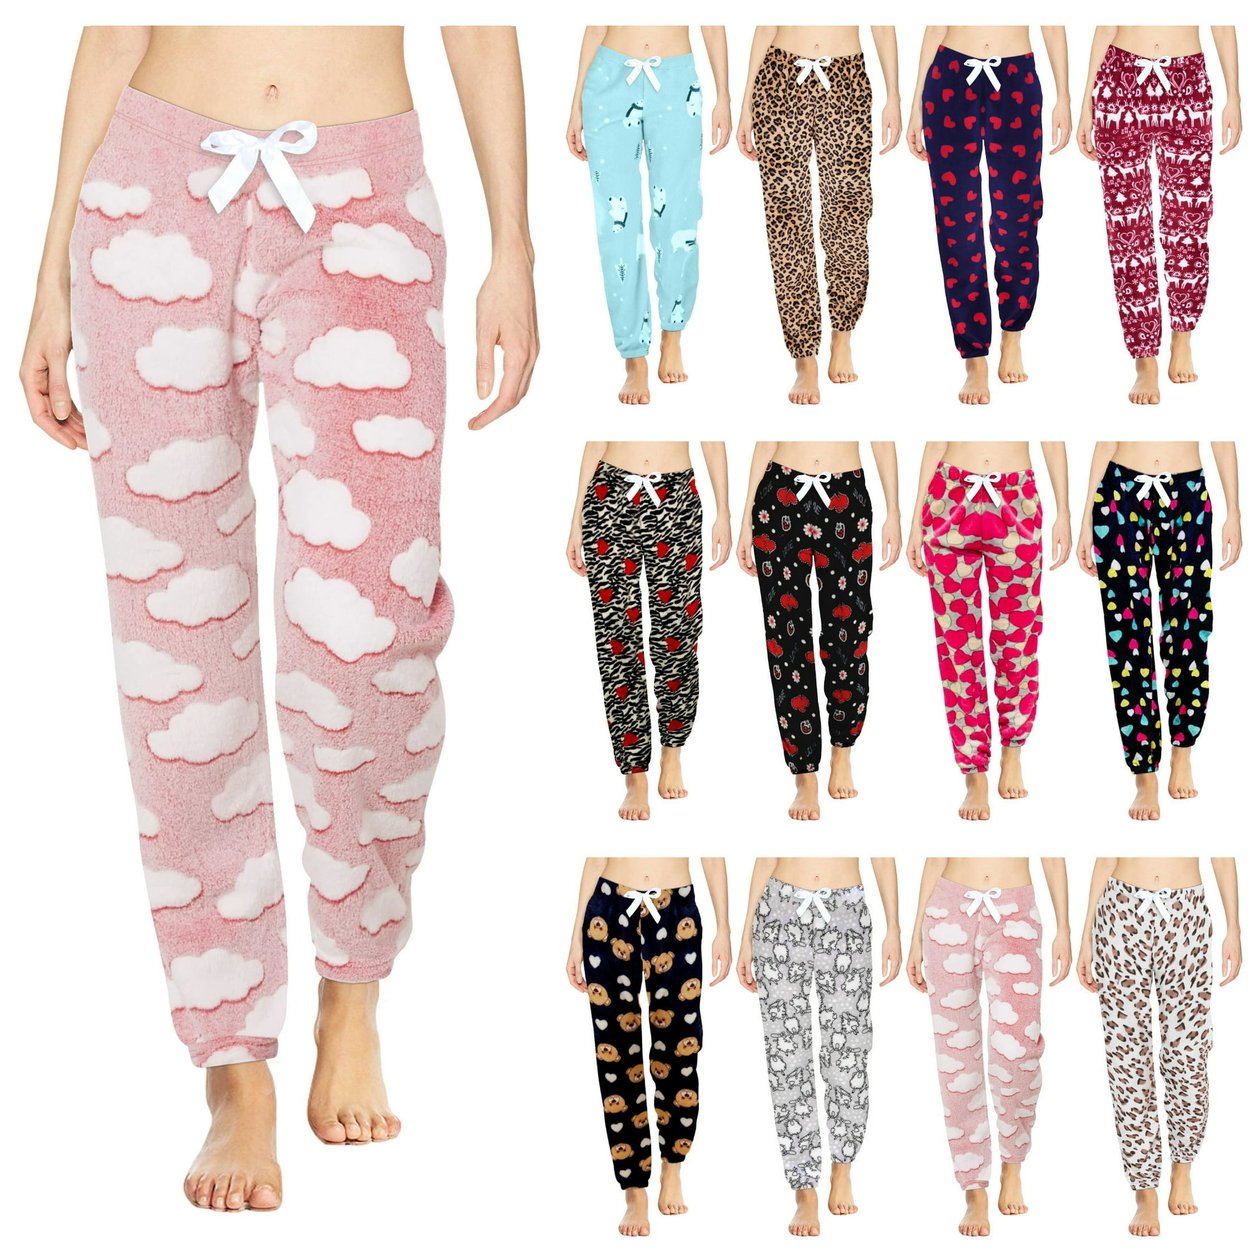 3-Pack: Women's Solid & Printed Ultra-Soft Comfy Stretch Micro-Fleece Pajama Lounge Pants - Small, Shapes